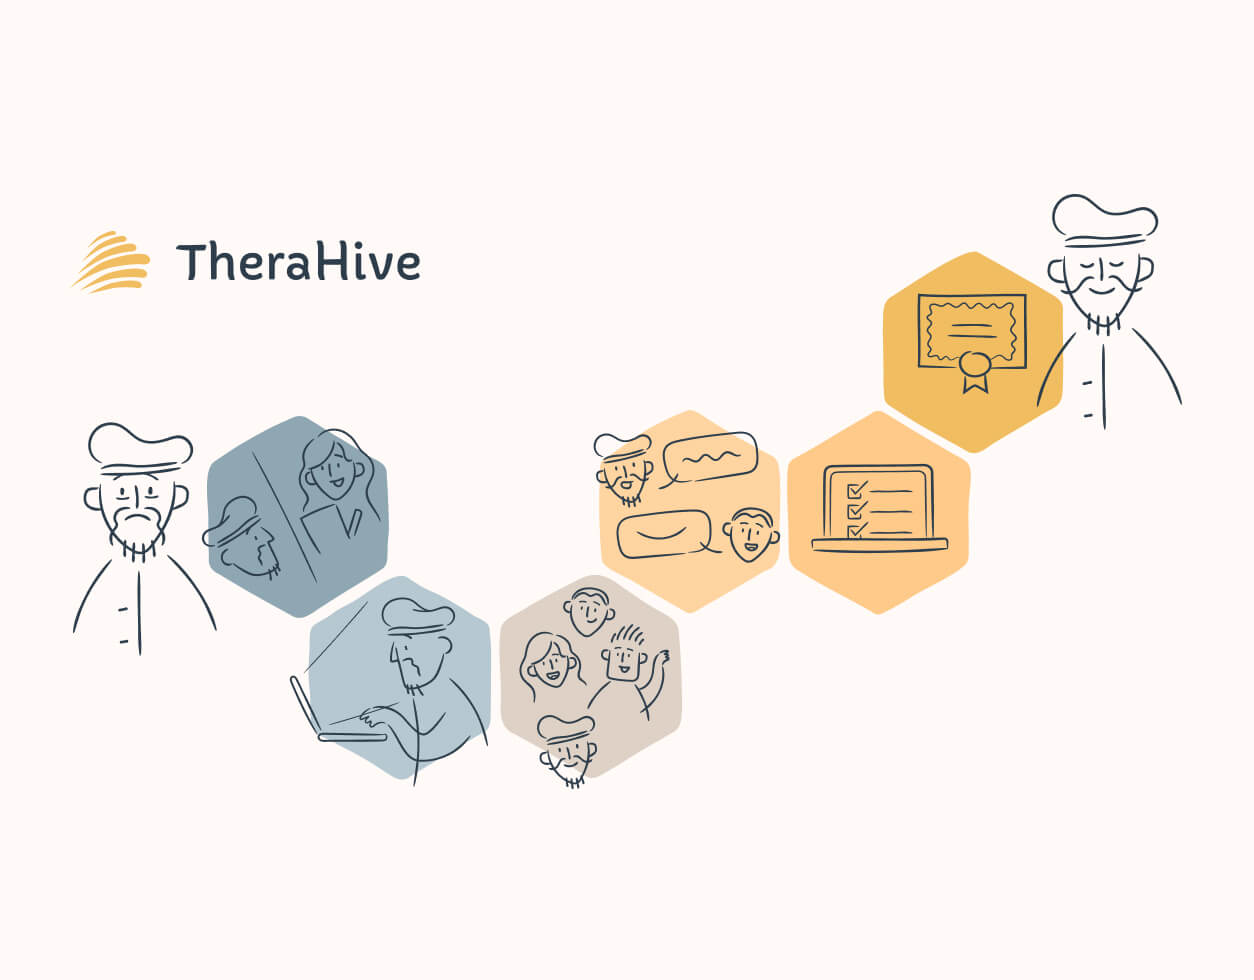 Example therahive illustration showing a character going through the stages of treatment and going from sad to happy